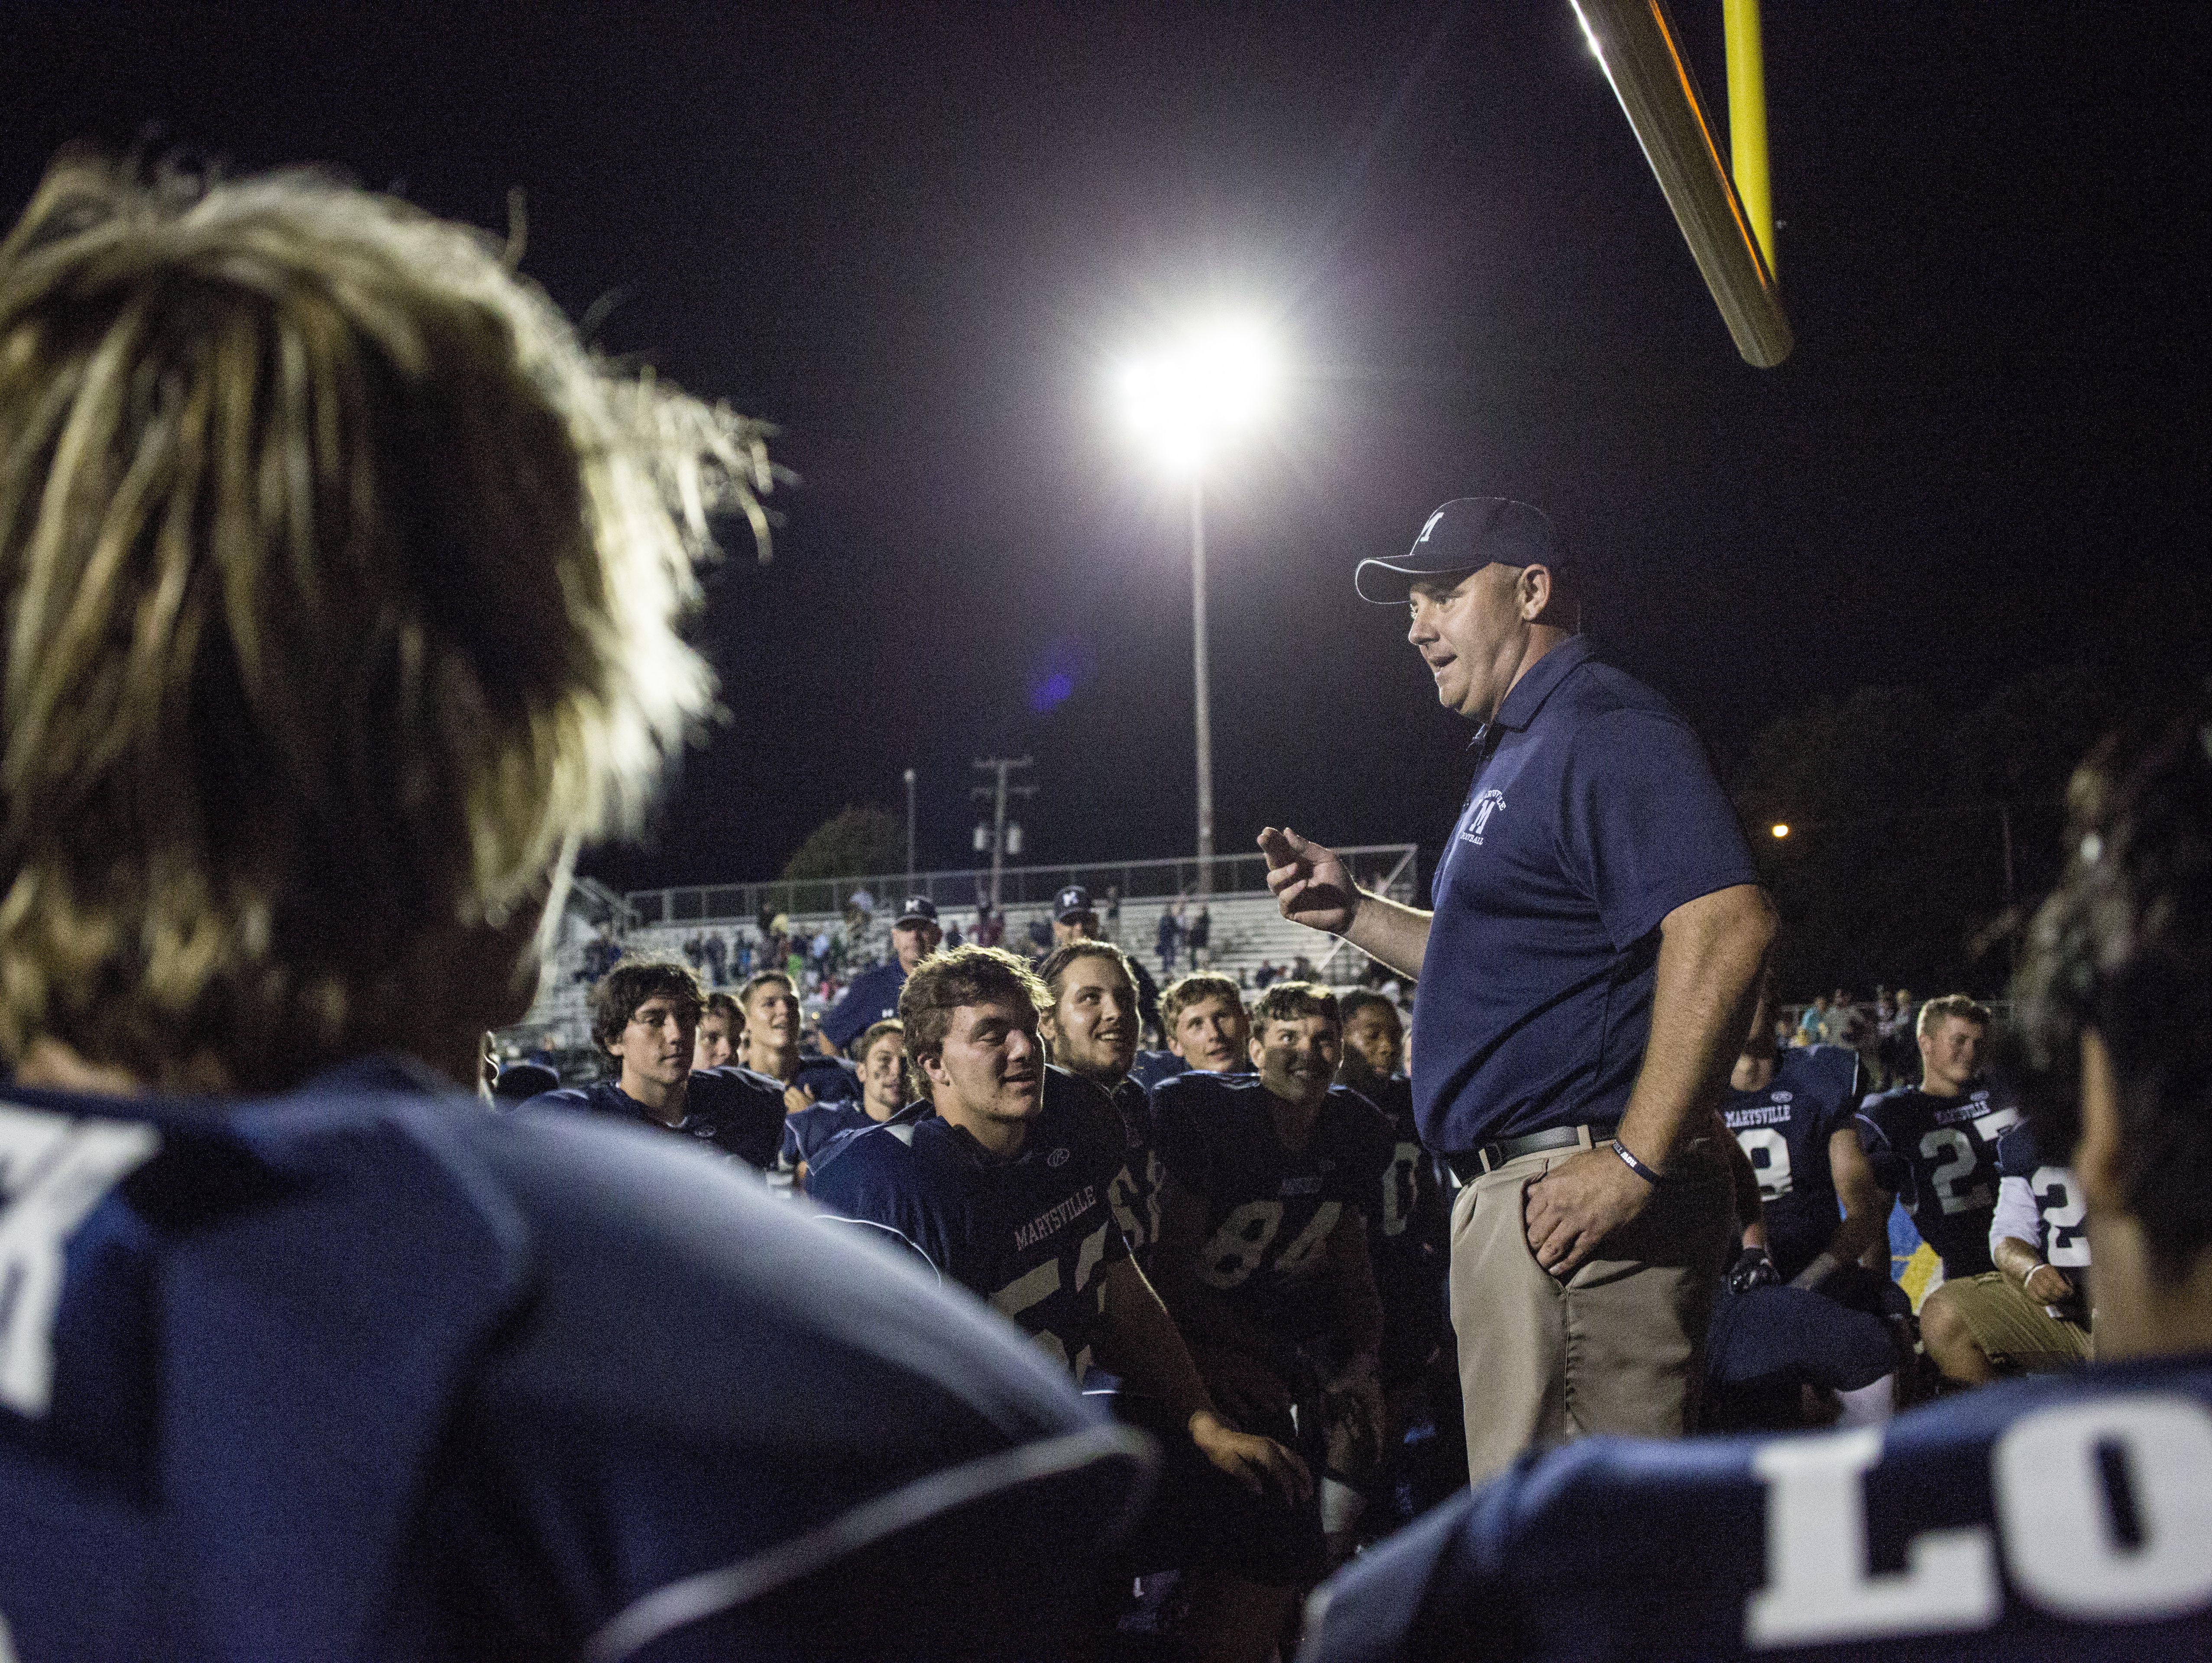 Marysville coach Mark Caza talks with players after beating Marine City in a football game Friday, September 16, 2016 at Marysville High School.